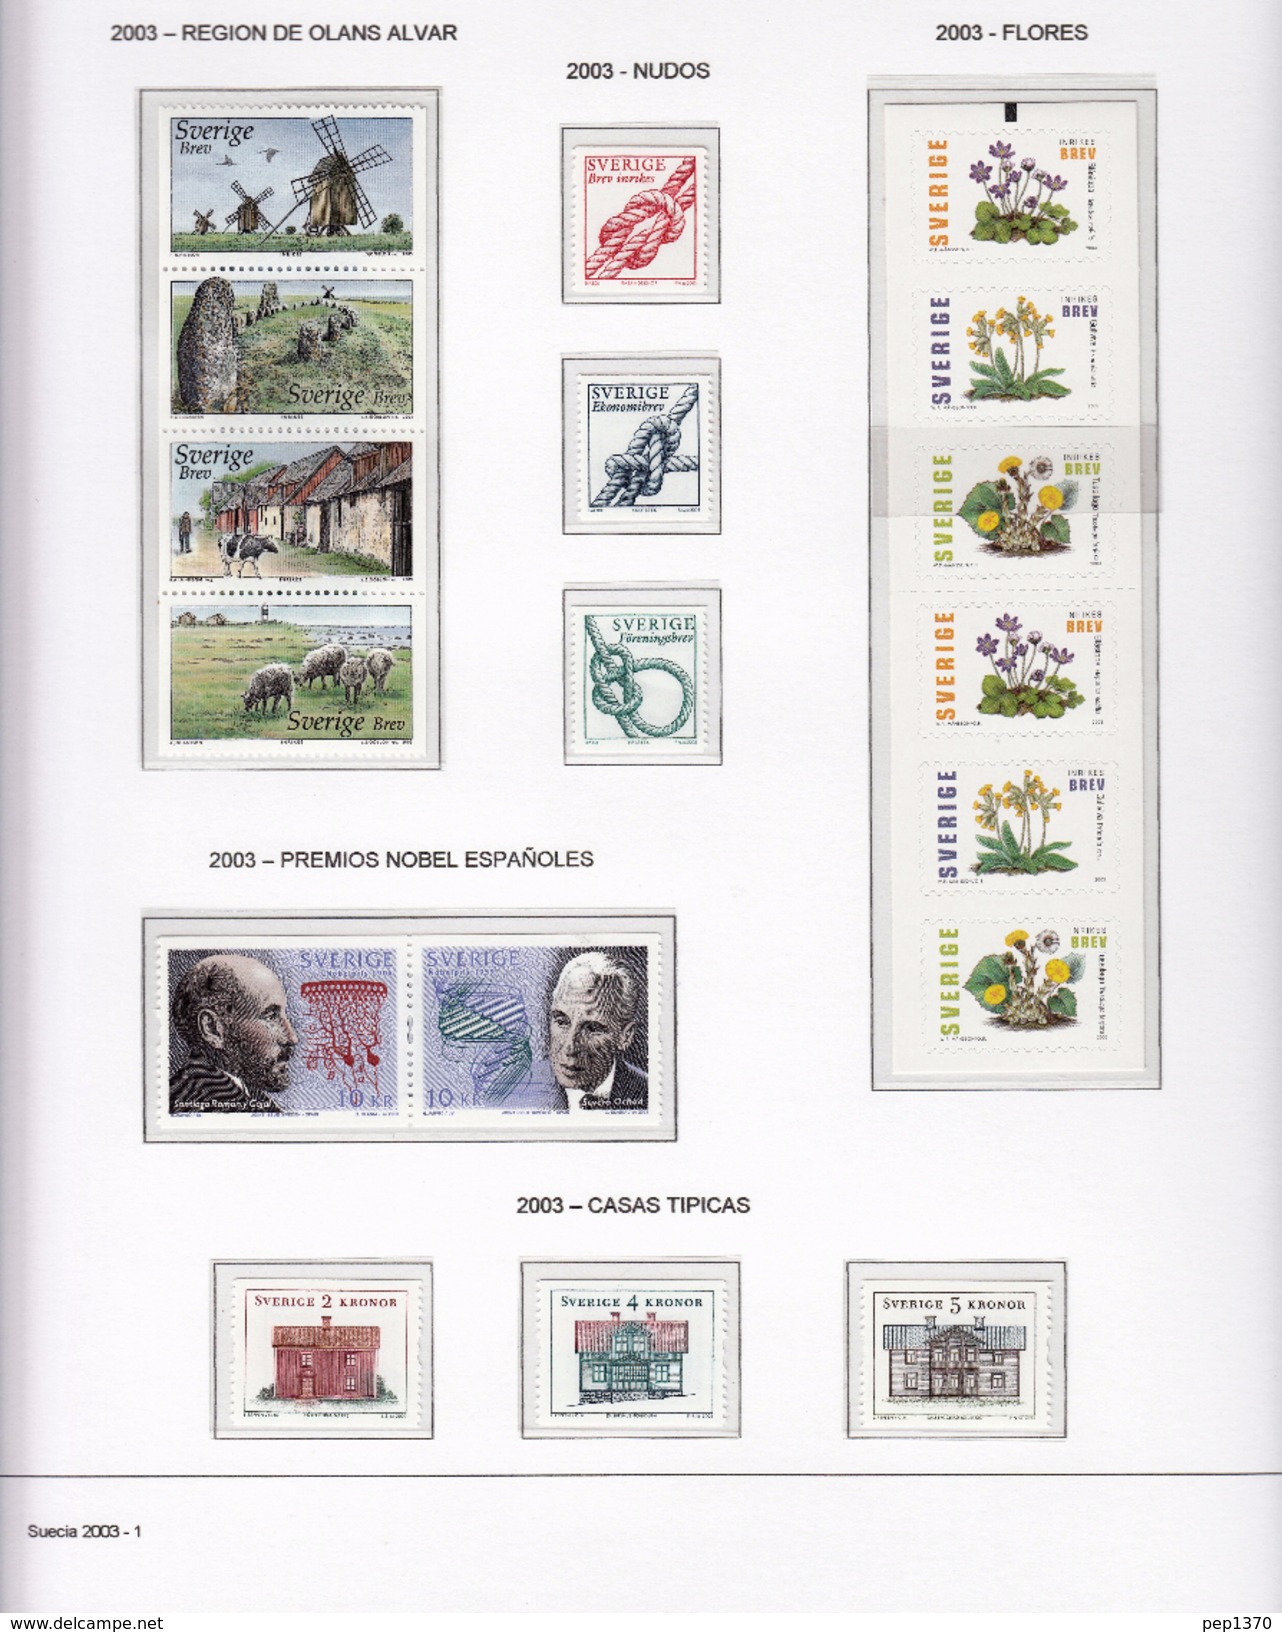 SUECIA 2002 - SWEDEN -  COMPLETE YEAR 2002 - IN ALBUM (SEE ALL THE IMAGES) (CATALOGUE 179,25) - Annate Complete